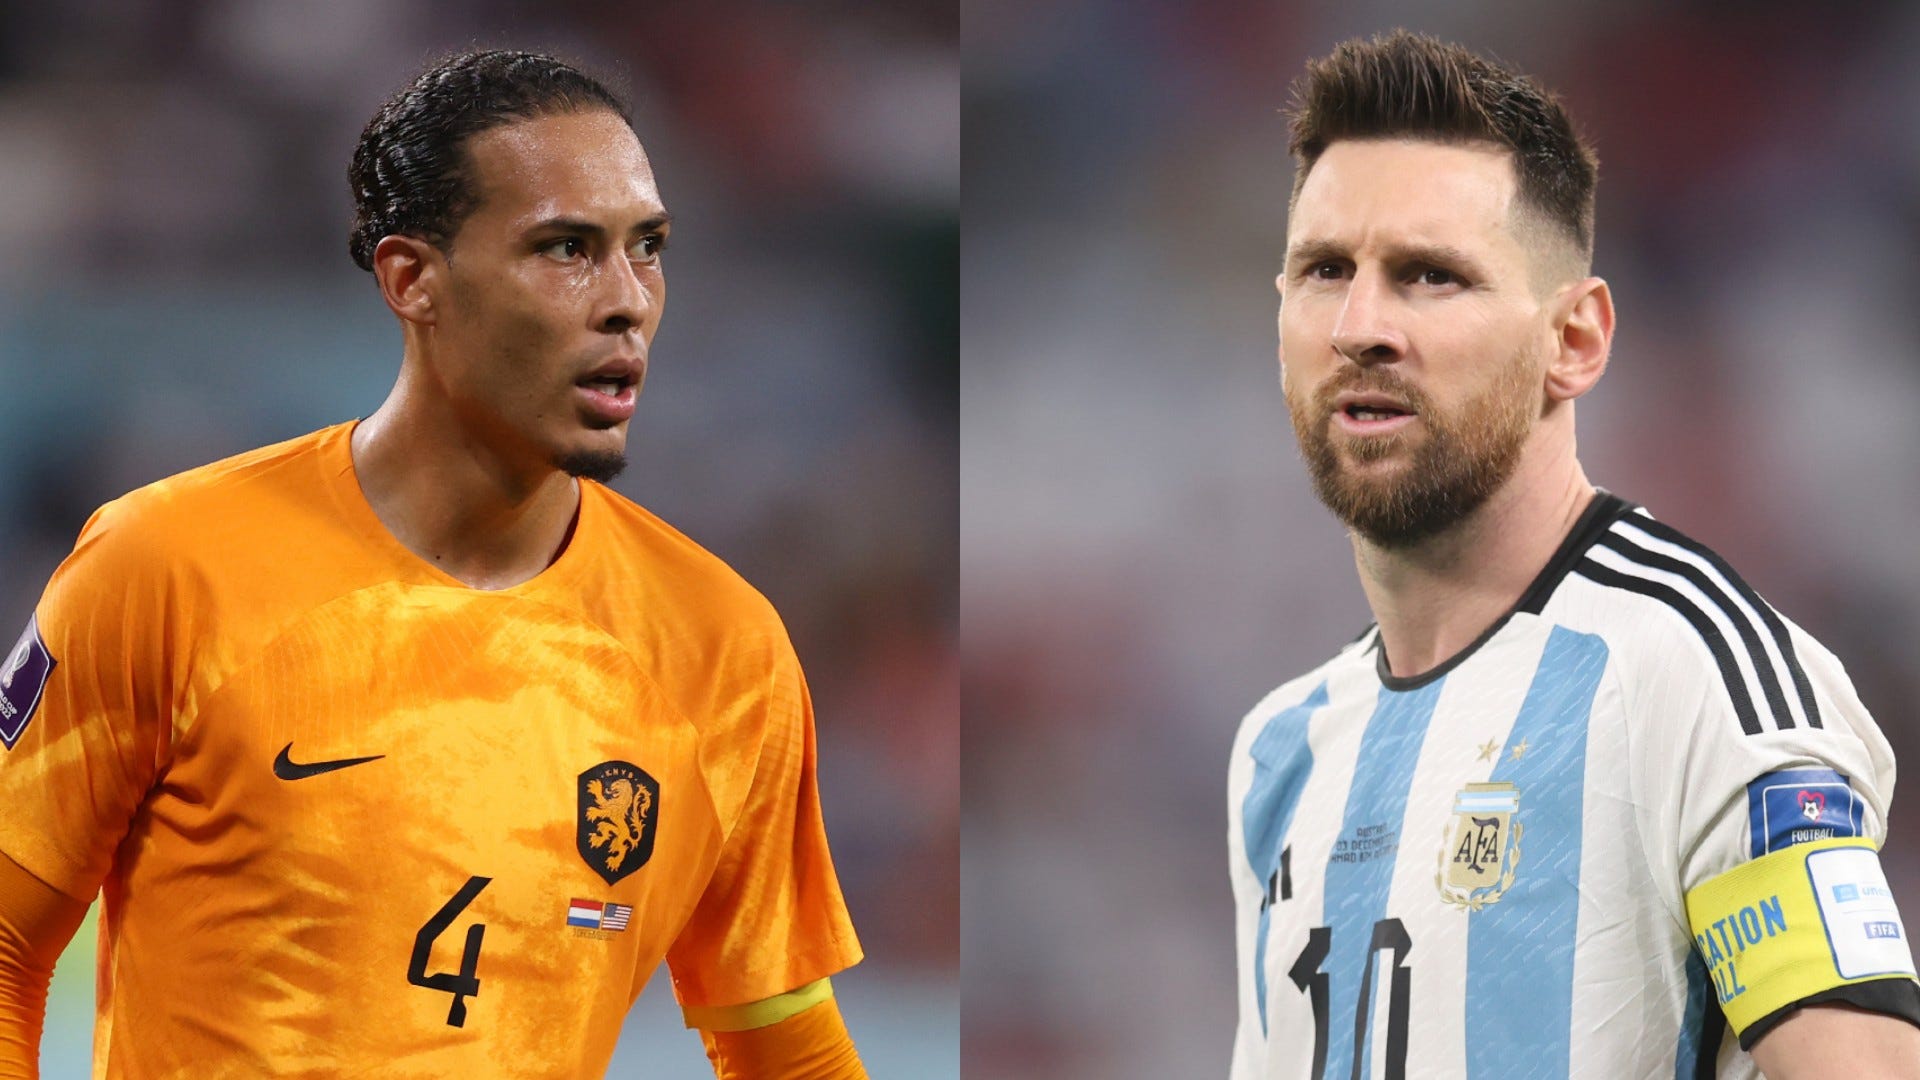 Netherlands vs Argentina Live stream, TV channel, kick-off time and where to watch Goal